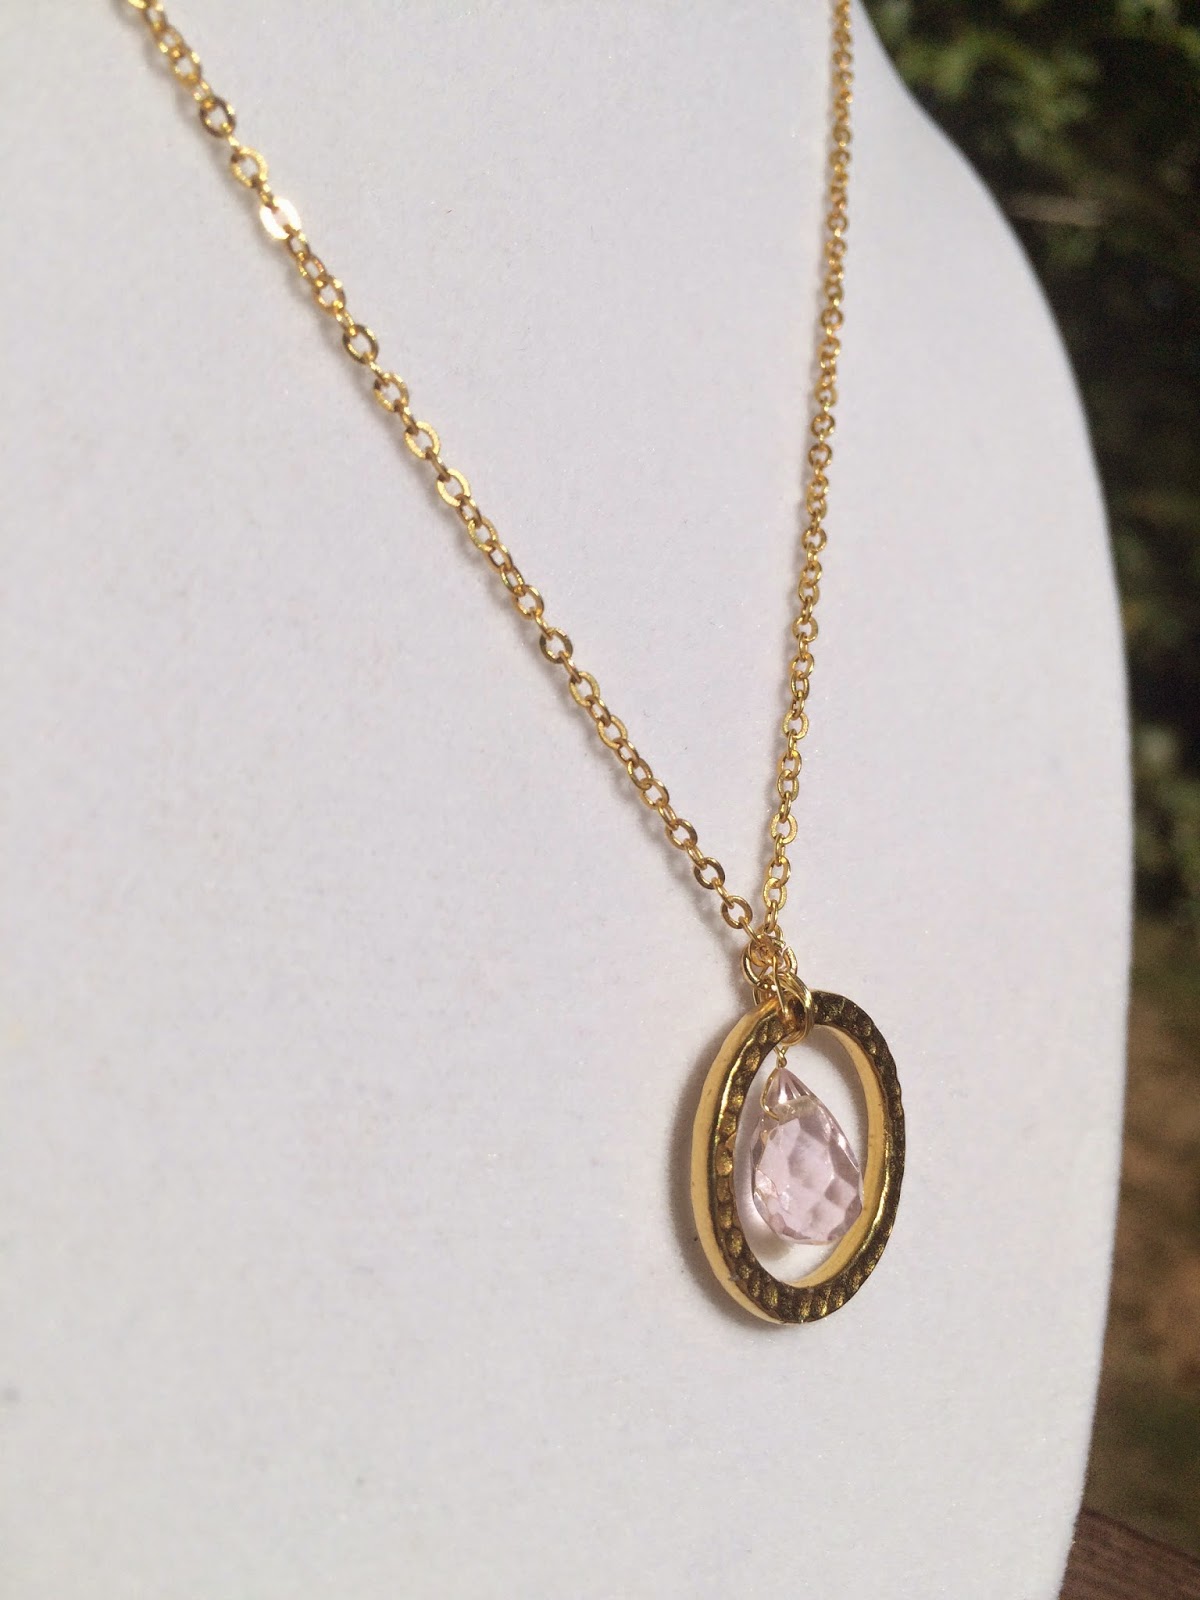 Bennett's Designs: Small Gold Hoop Necklace with Pink Stone